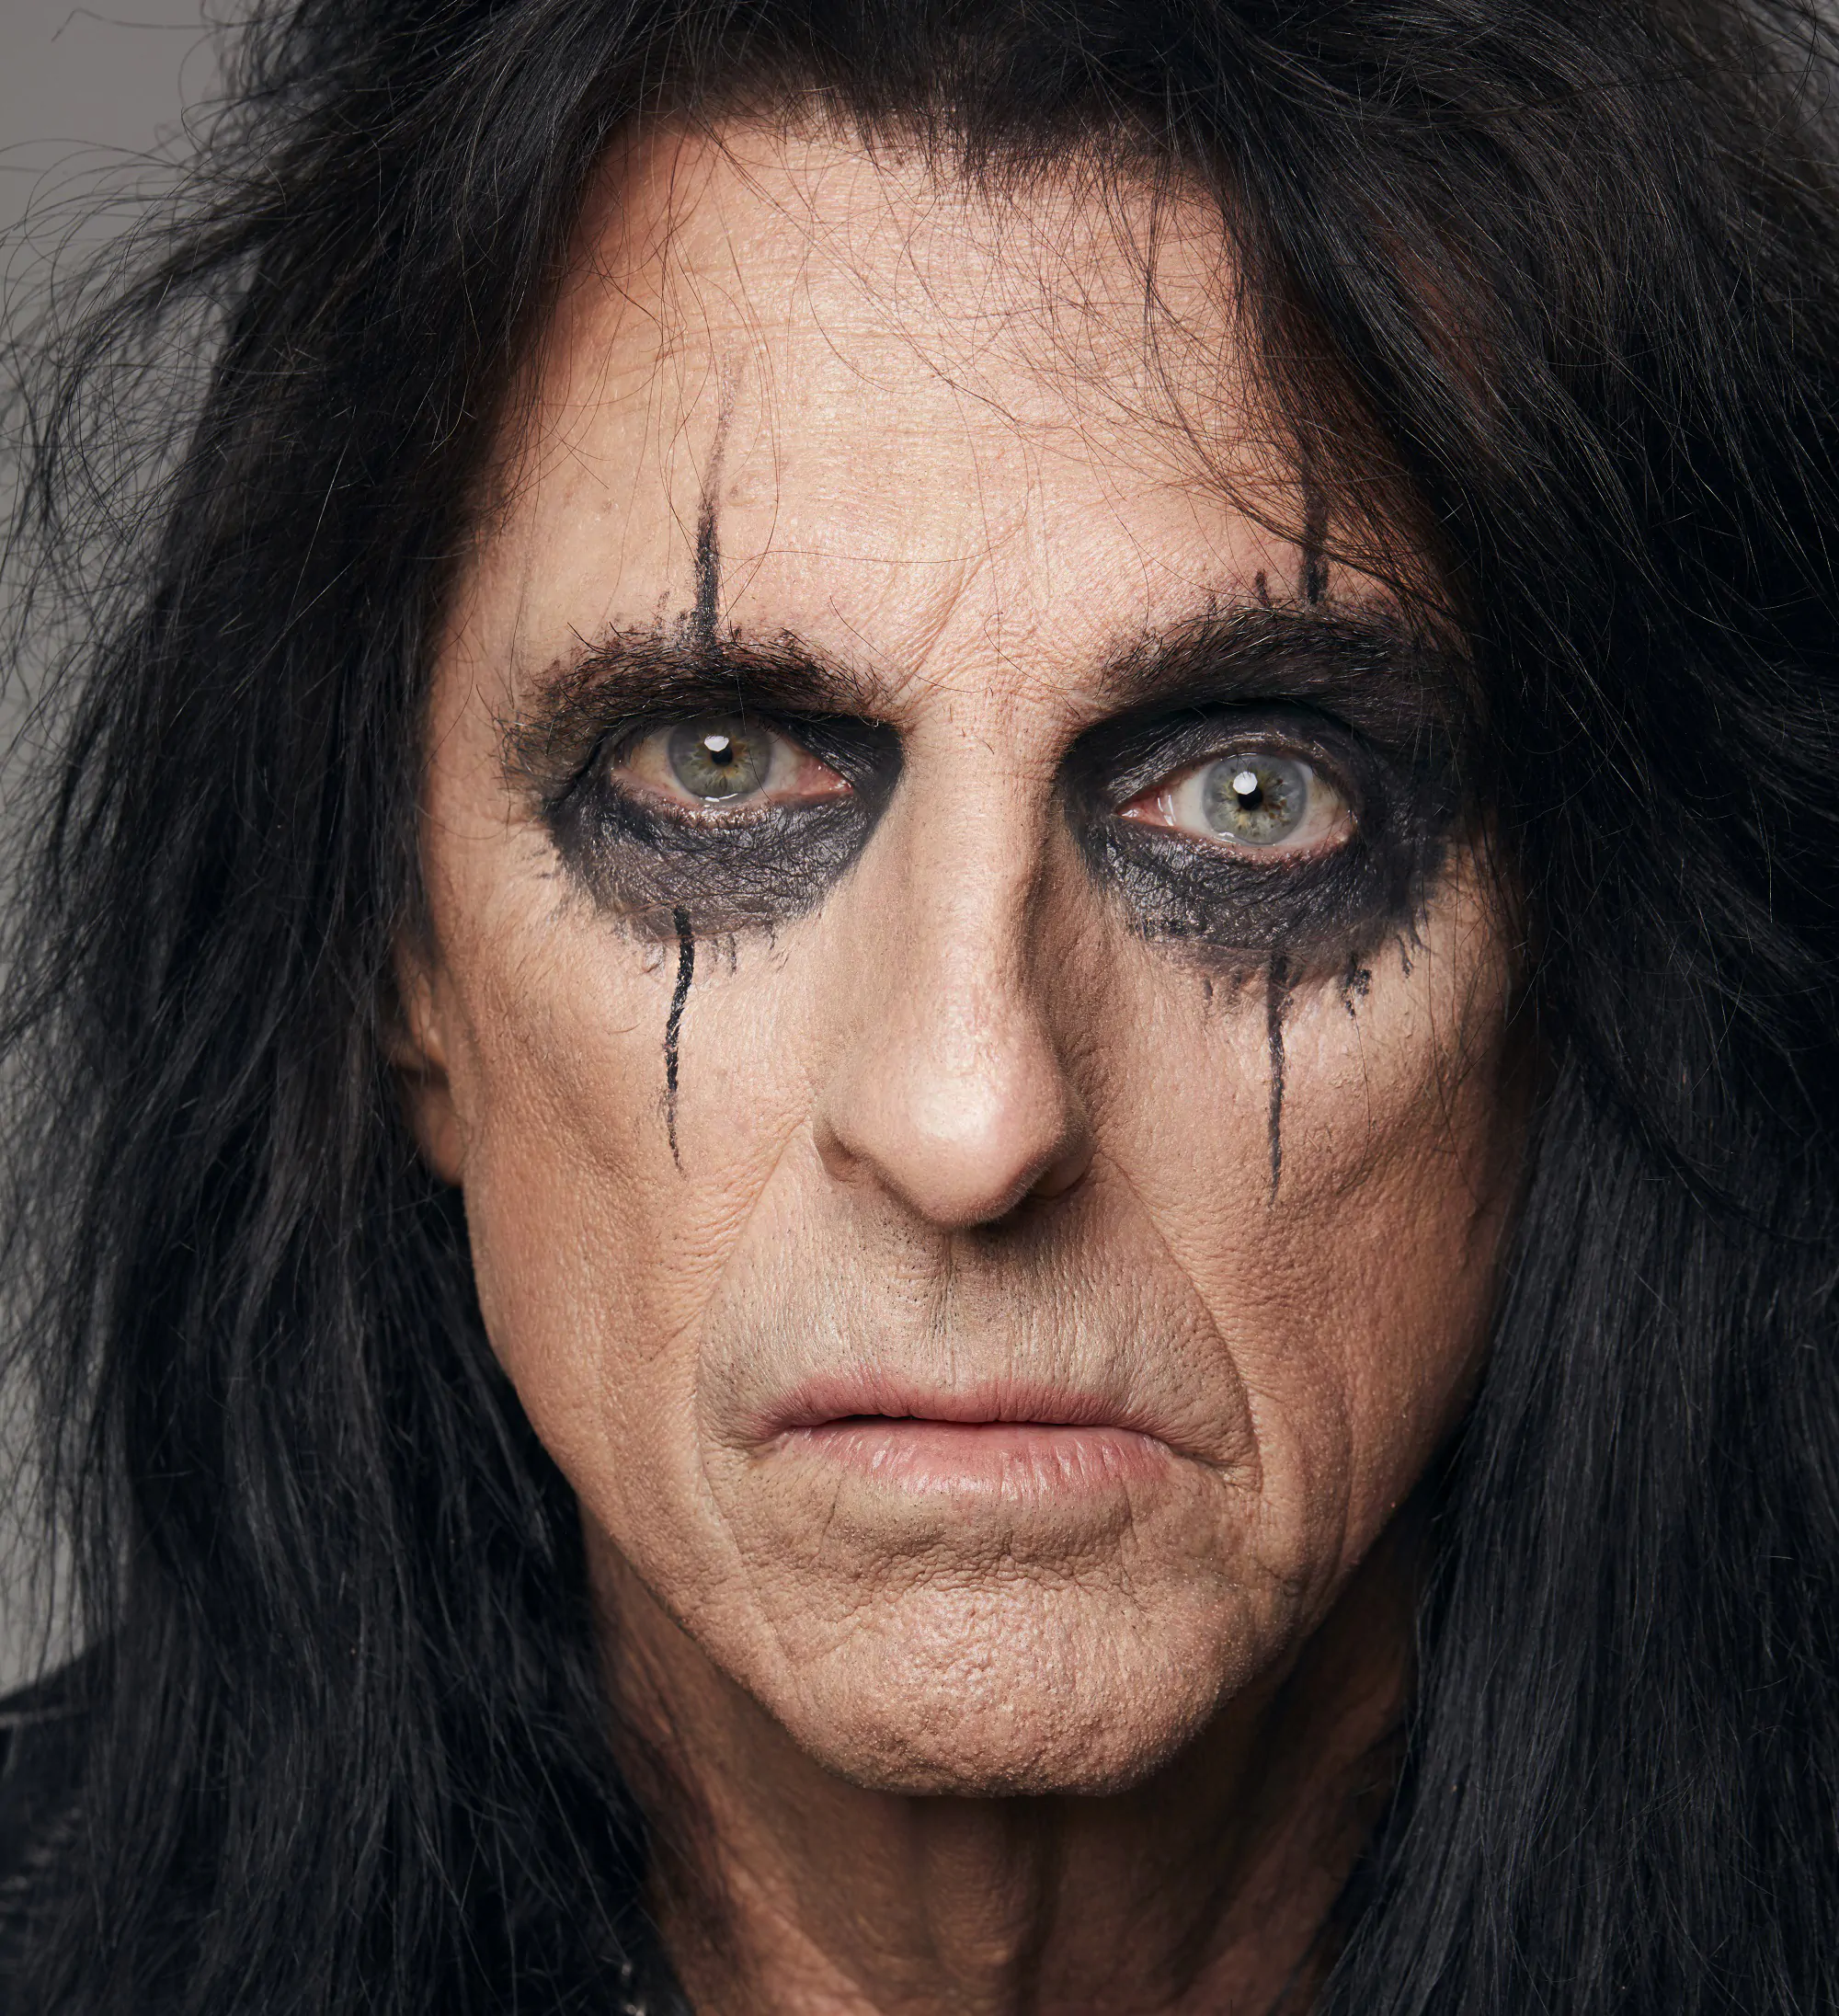 ALICE COOPER releases ‘Our Love Will Change The World’ from his upcoming new studio album Detroit Stories